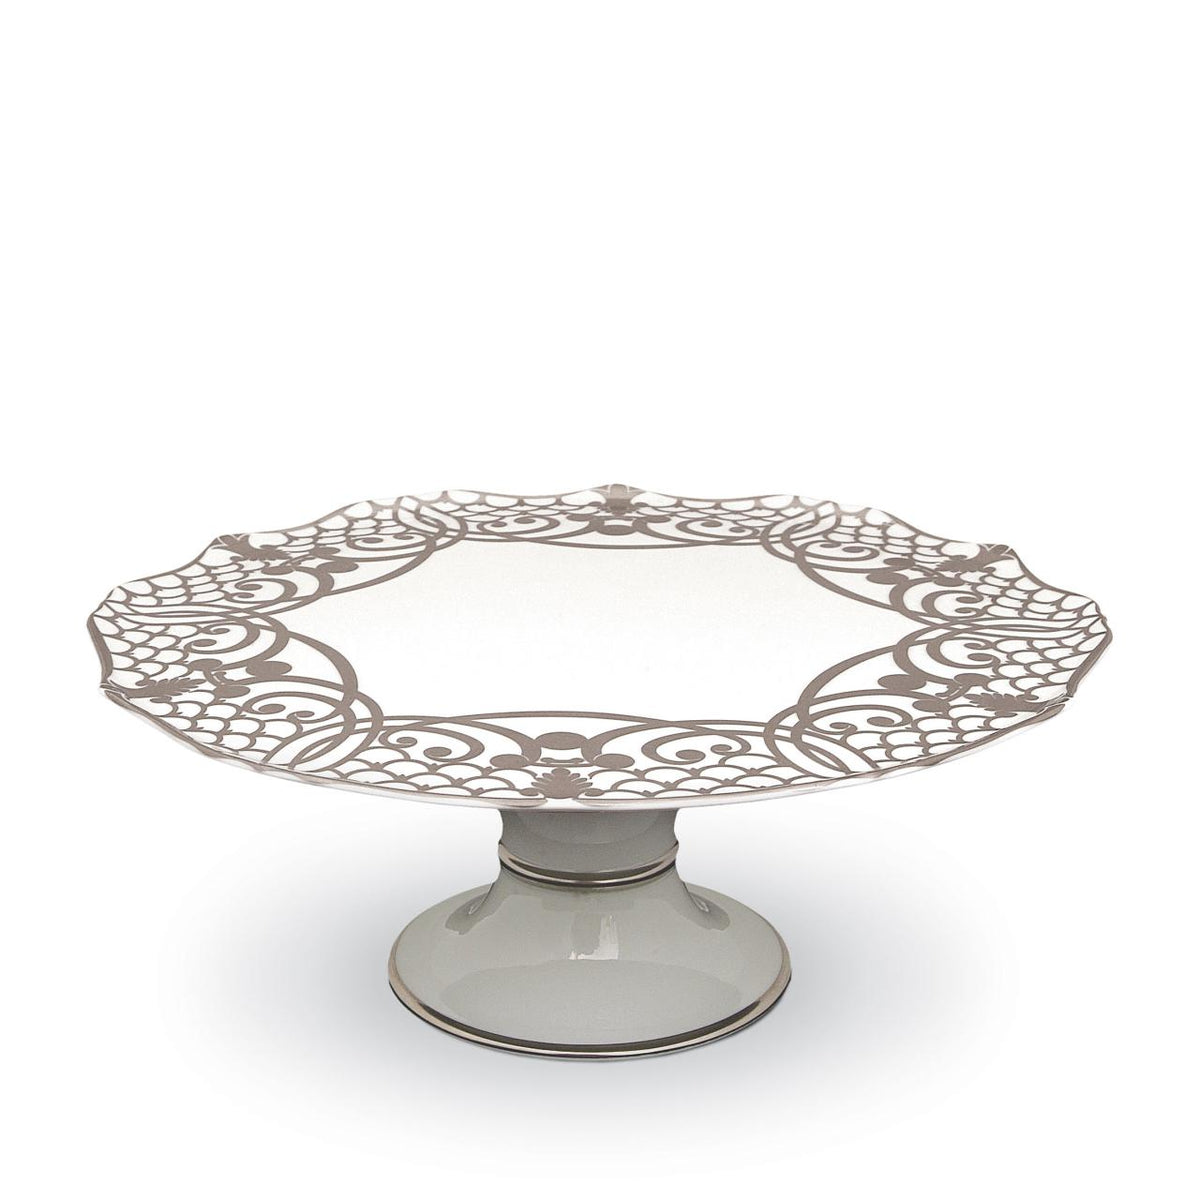 Alencon Silver Footed Cake Plate - RSVP Style